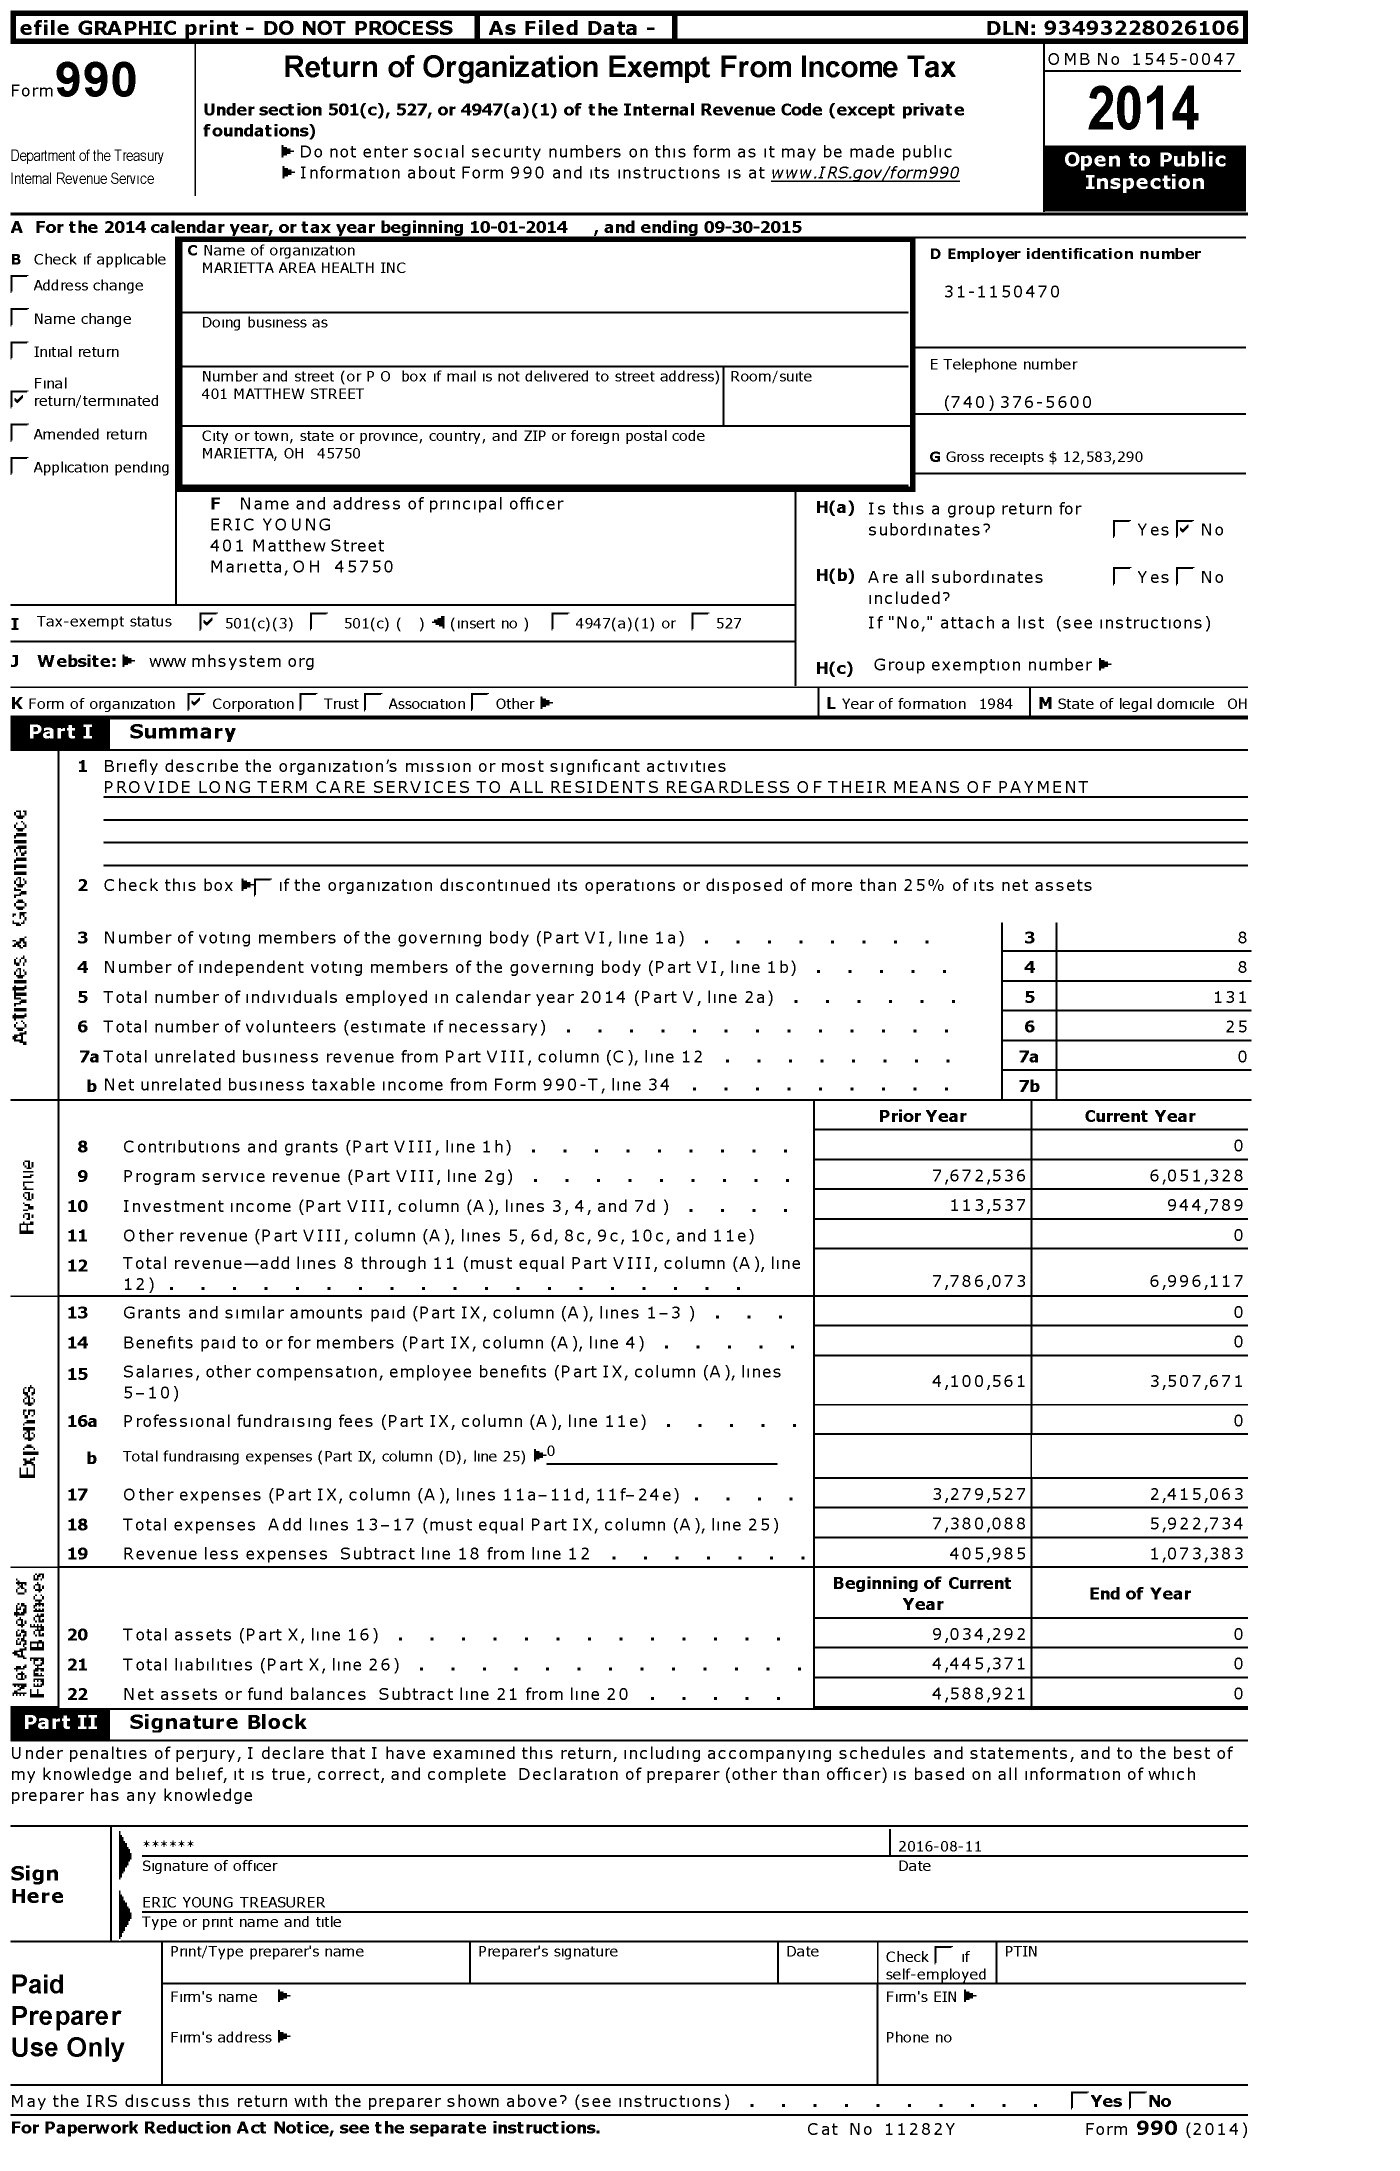 Image of first page of 2014 Form 990 for Marietta Area Health